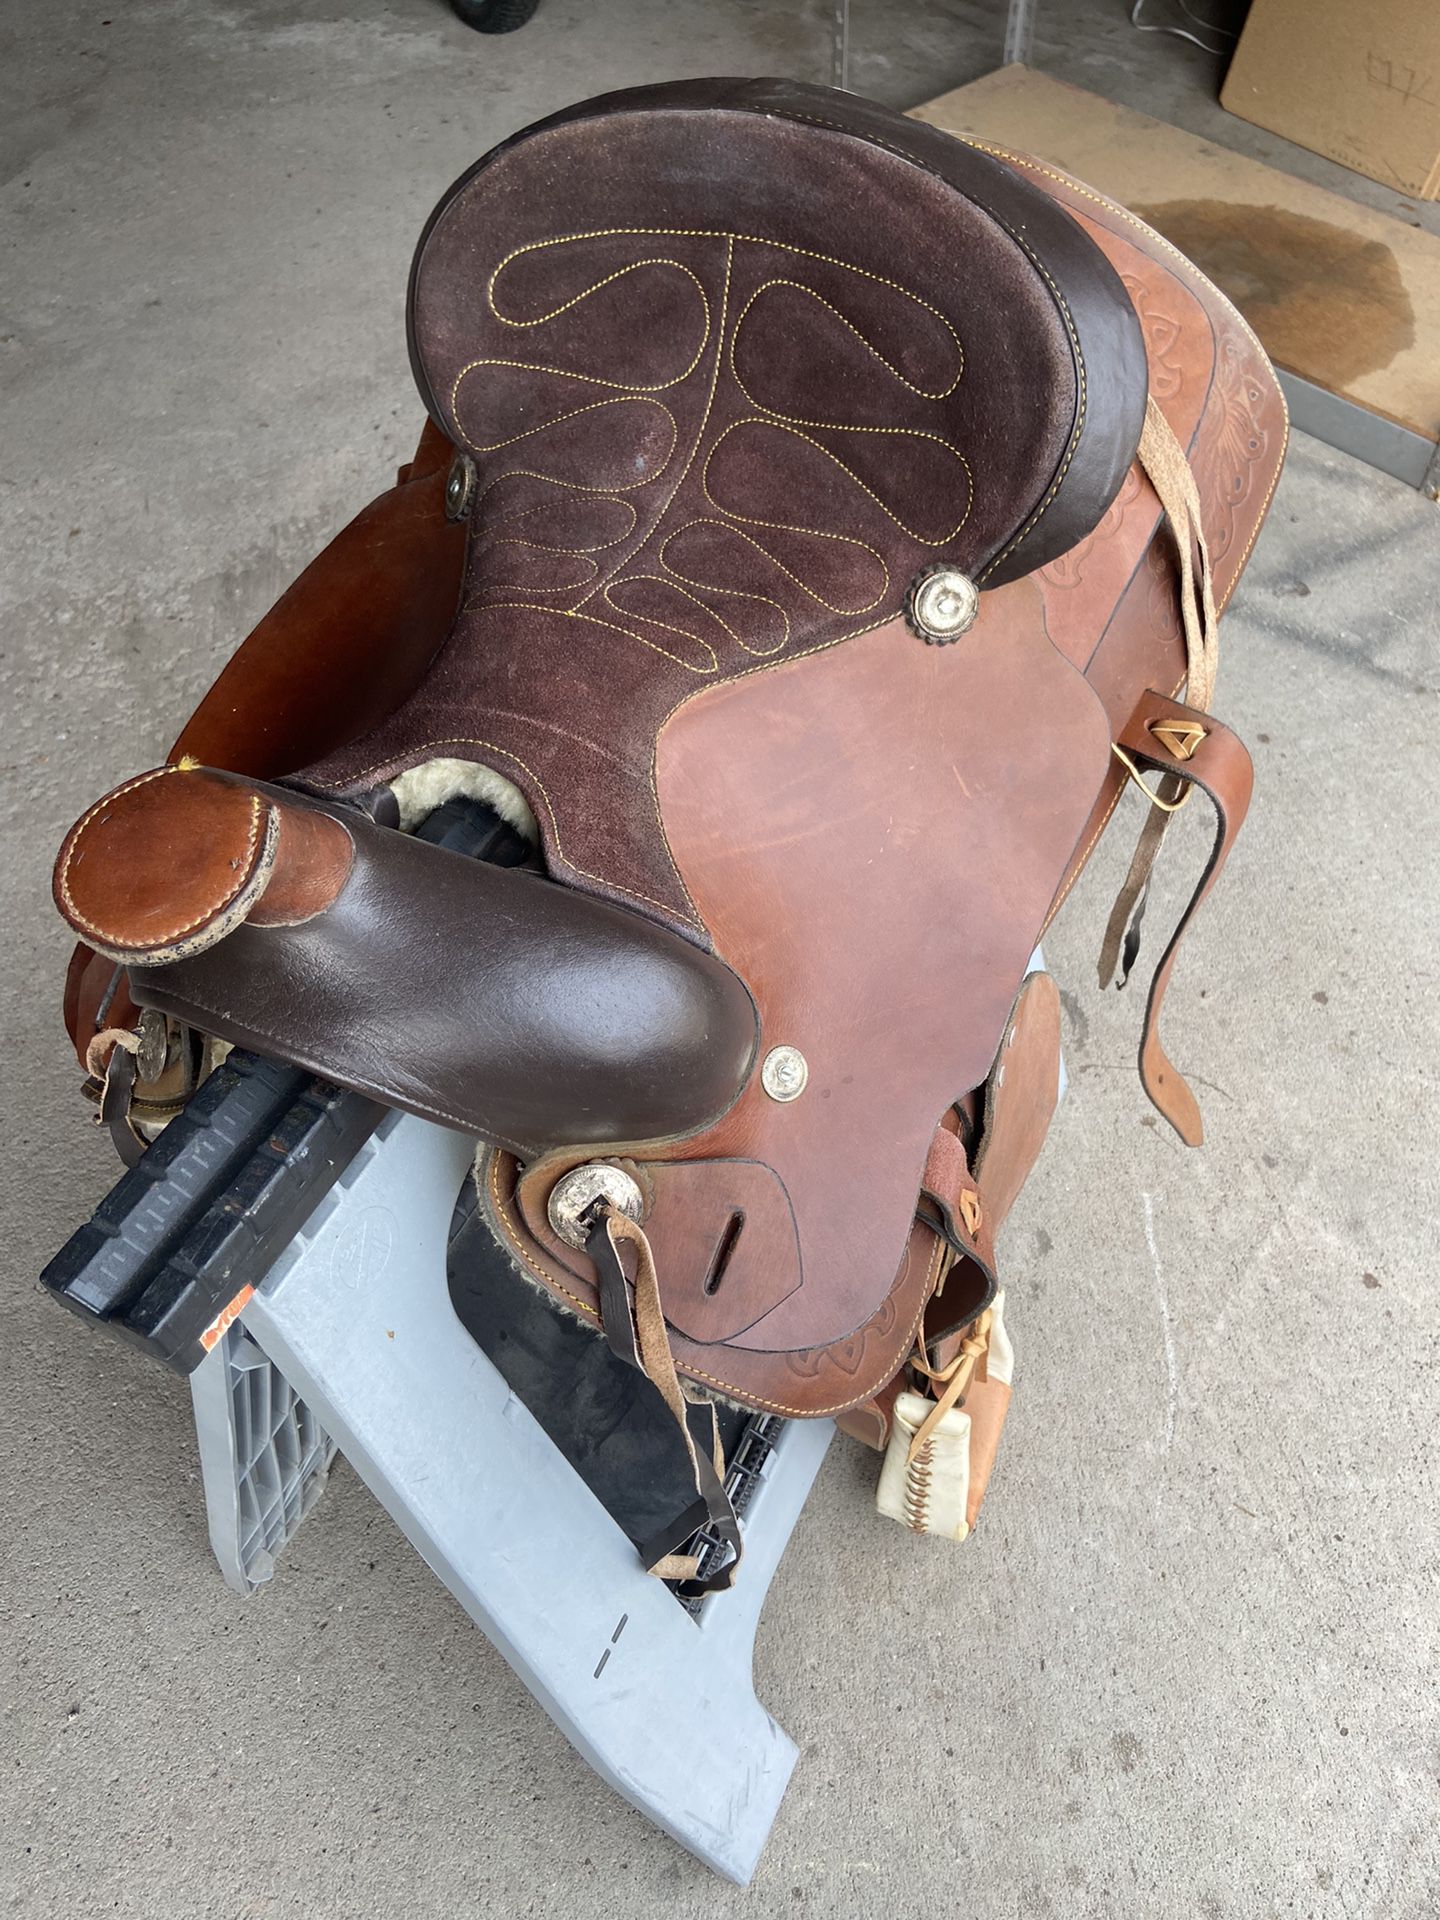 Western Saddle 15 1/2” very light use, upgraded with new rawhide stirrups. $250 or obo. This is a take on the B bar B style. Good beginner saddle. Tha